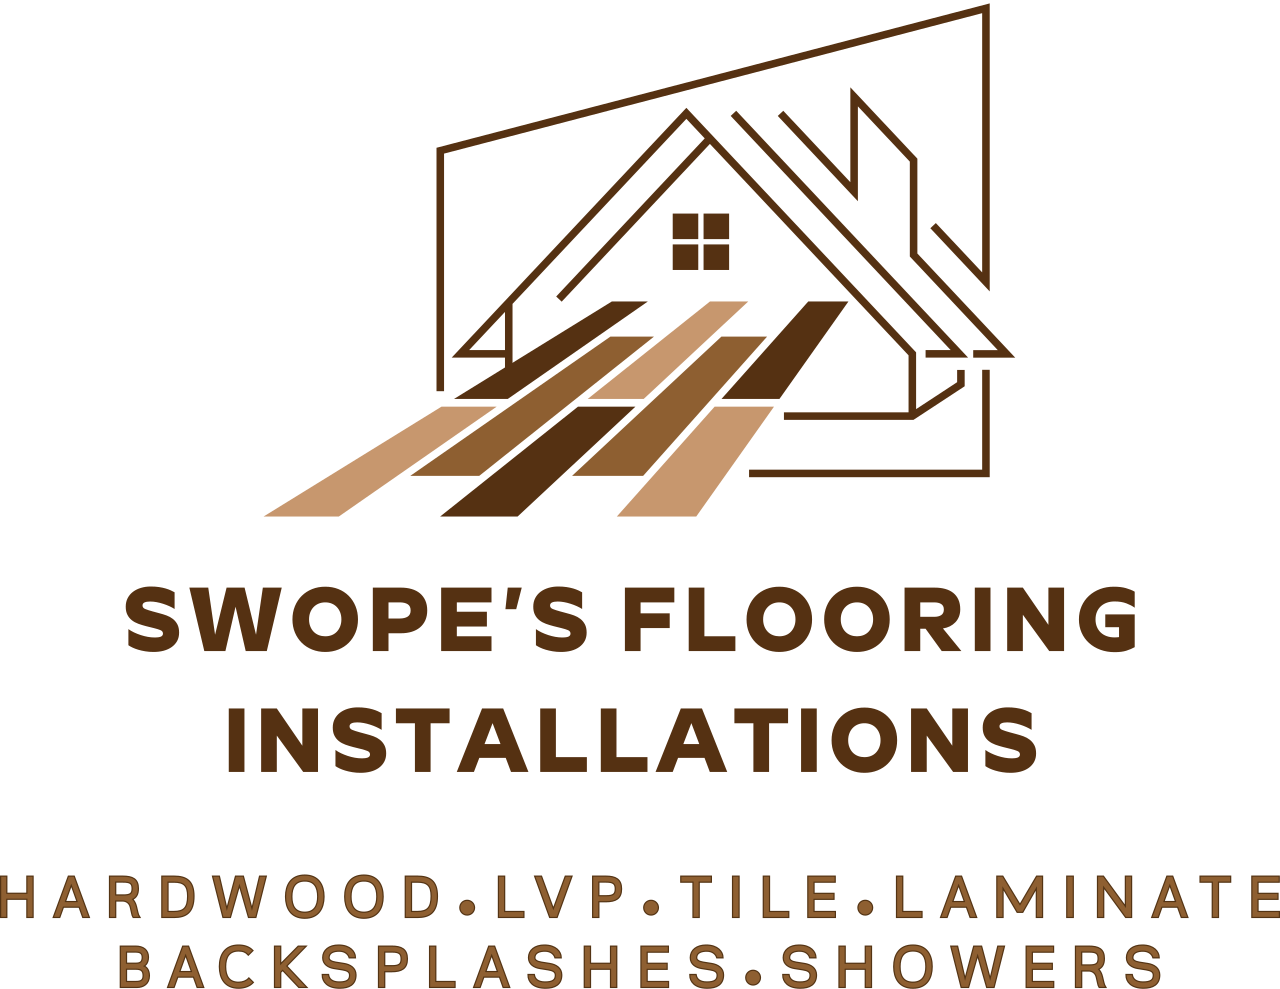 Swope’s Flooring
Installations's web page